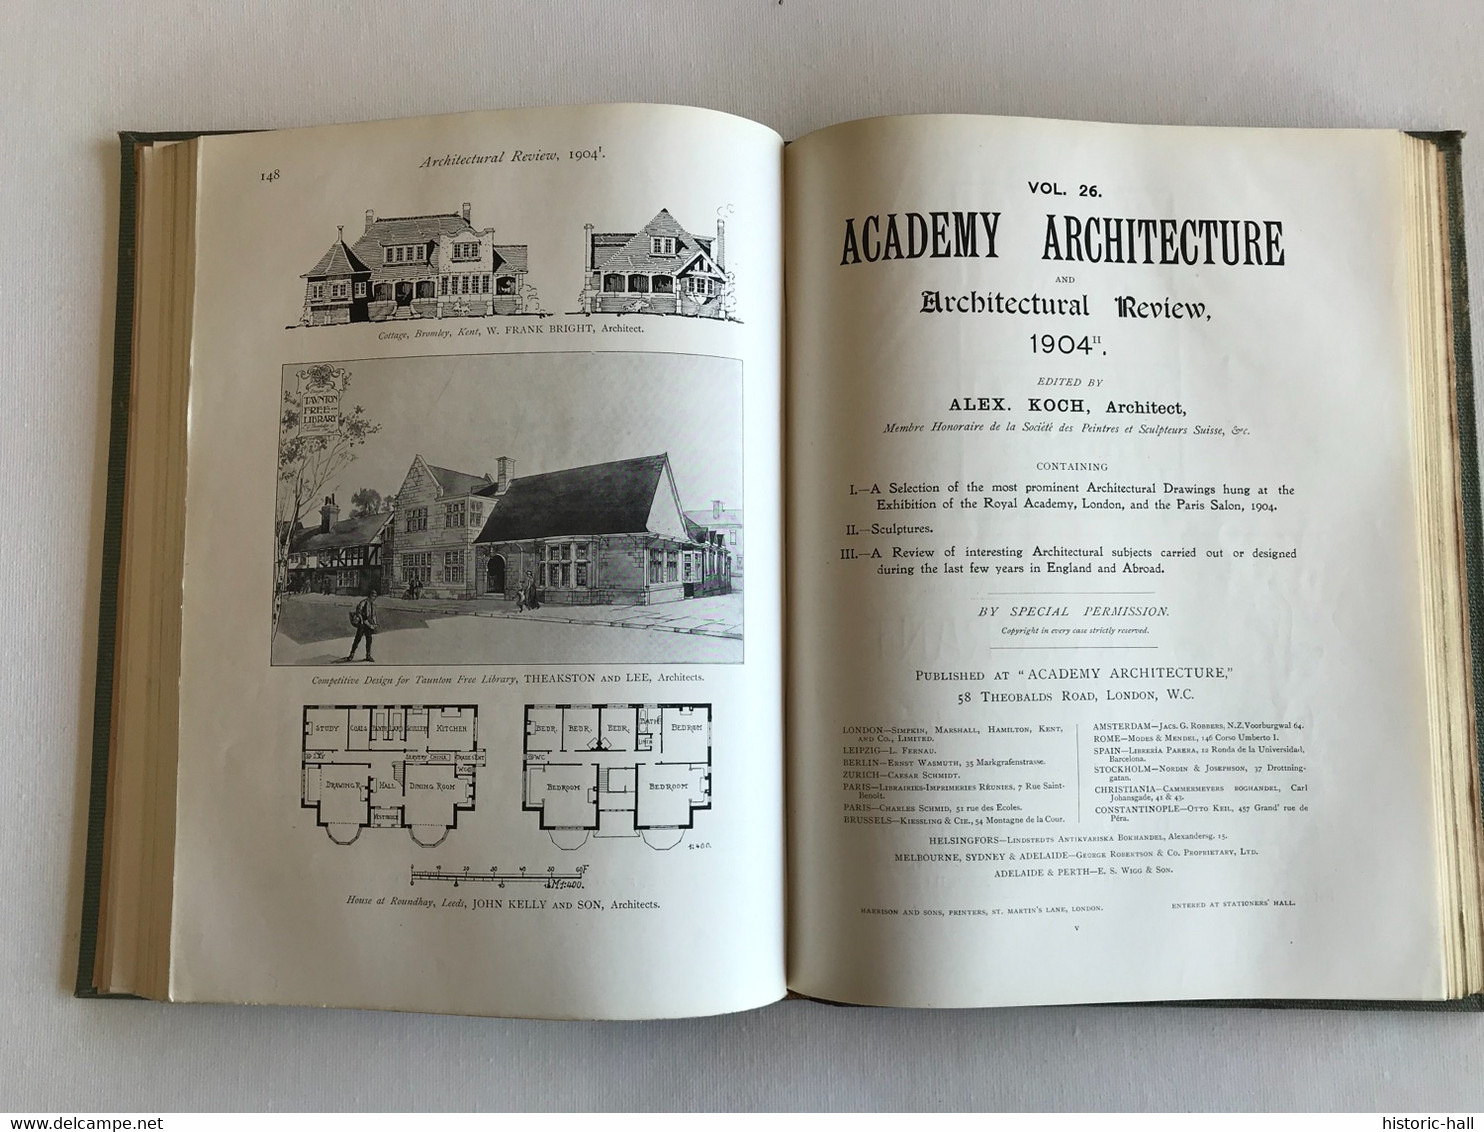 ACADEMY ARCHITECTURE & Architectural Review - vol 25 & 26 - 1904 - Alexander KOCH